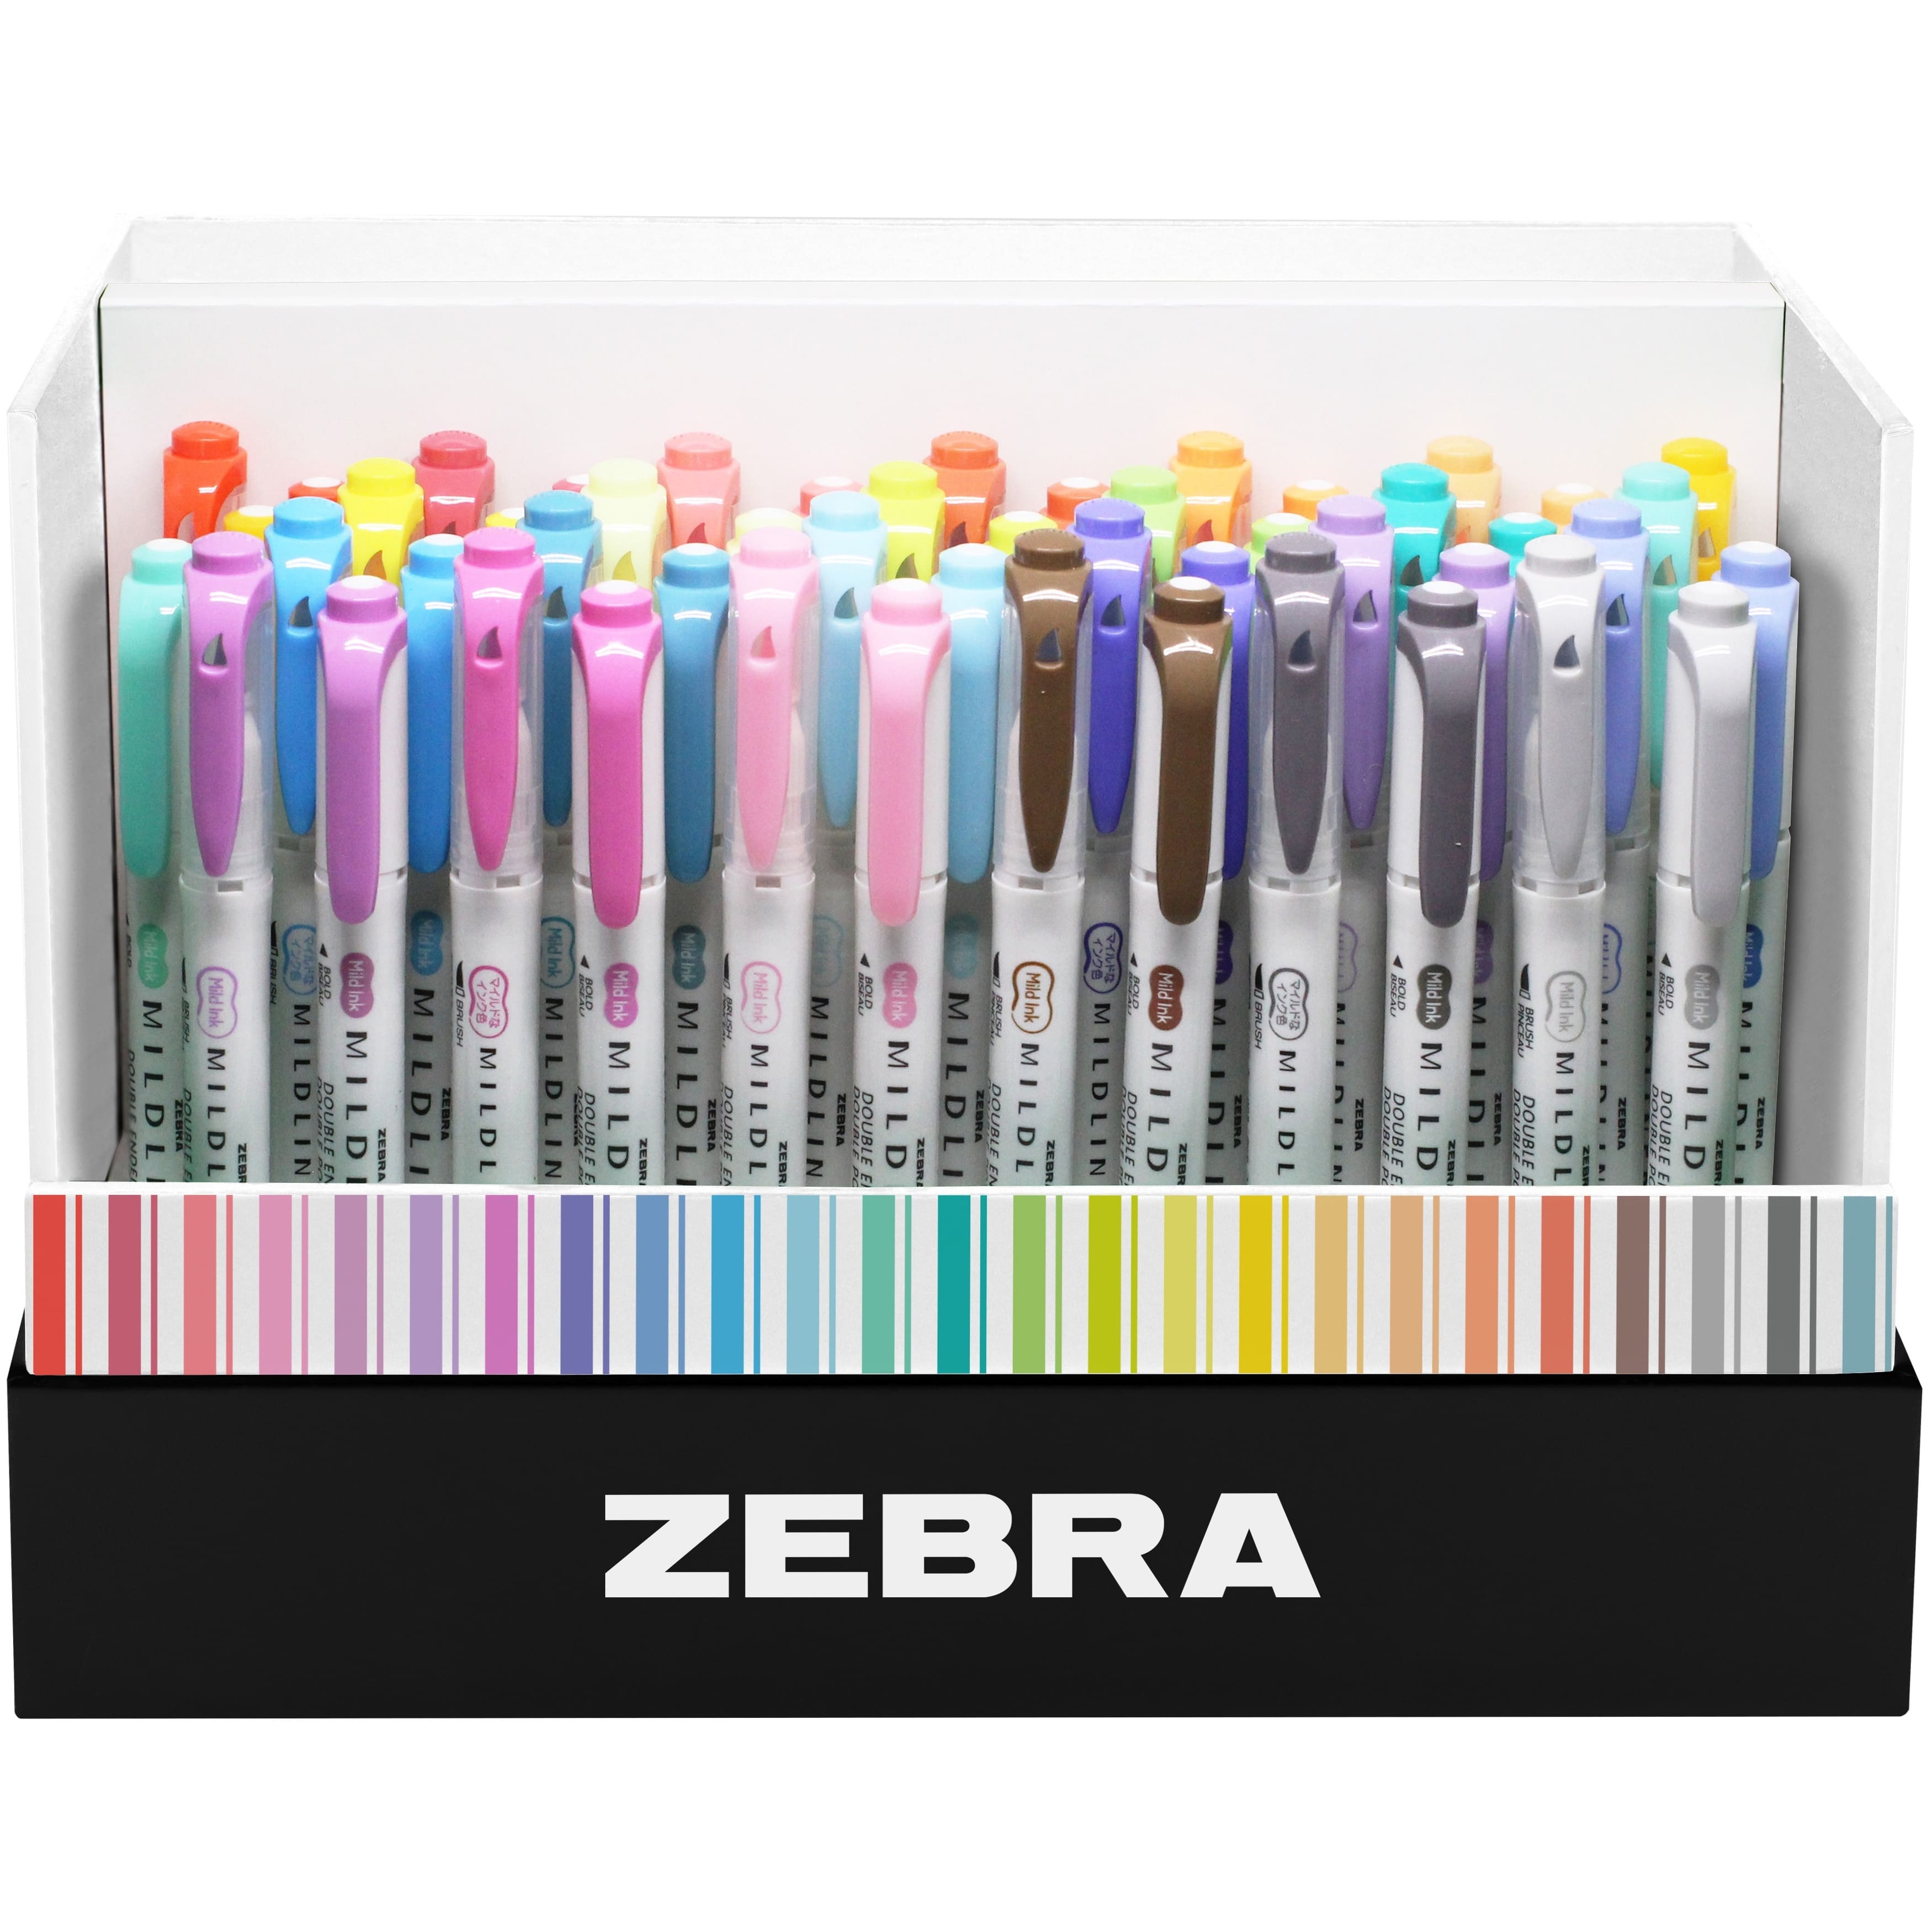  Zebra Pen Mildliner Double Ended Brush Pen, Brush and Point  Tips, Assorted Ink Colors, 25-Pack, Multicolor (79125) : Office Products